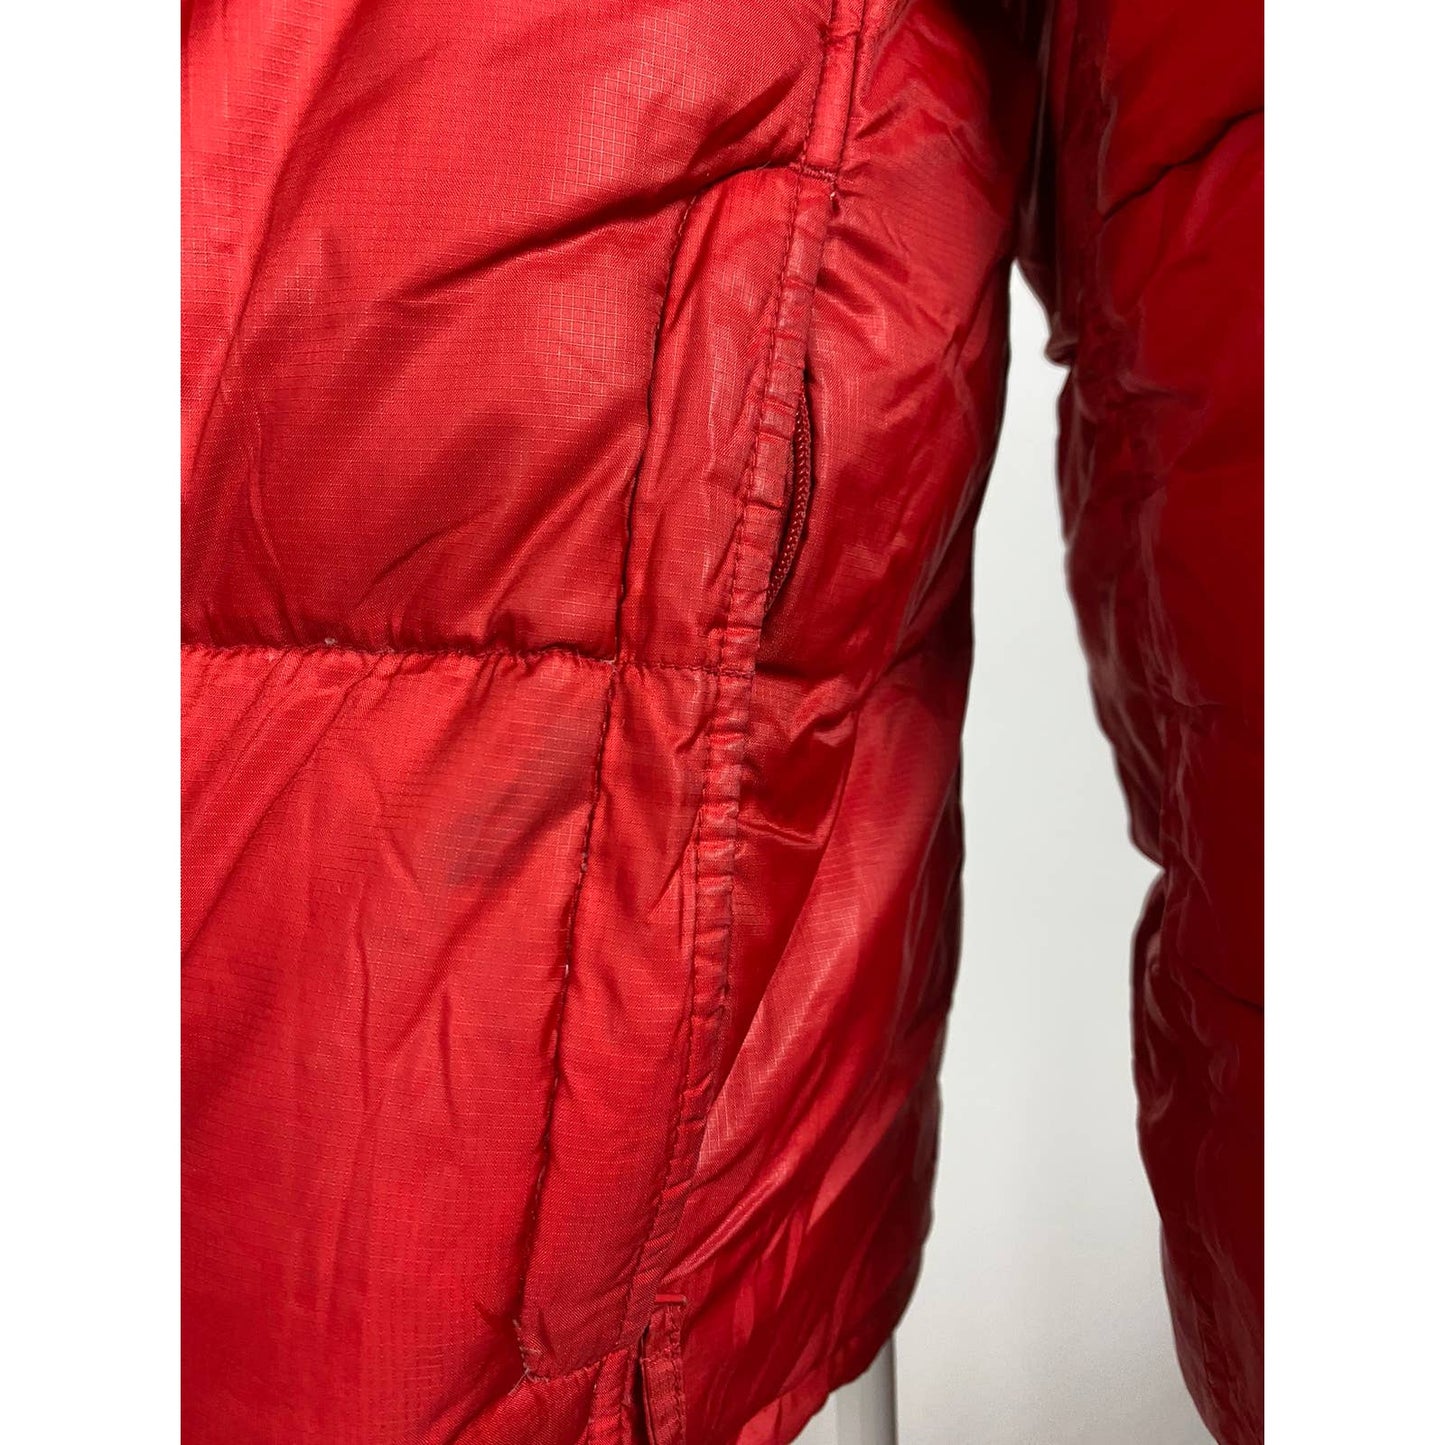 Nike vintage red puffer jacket small swoosh cargo